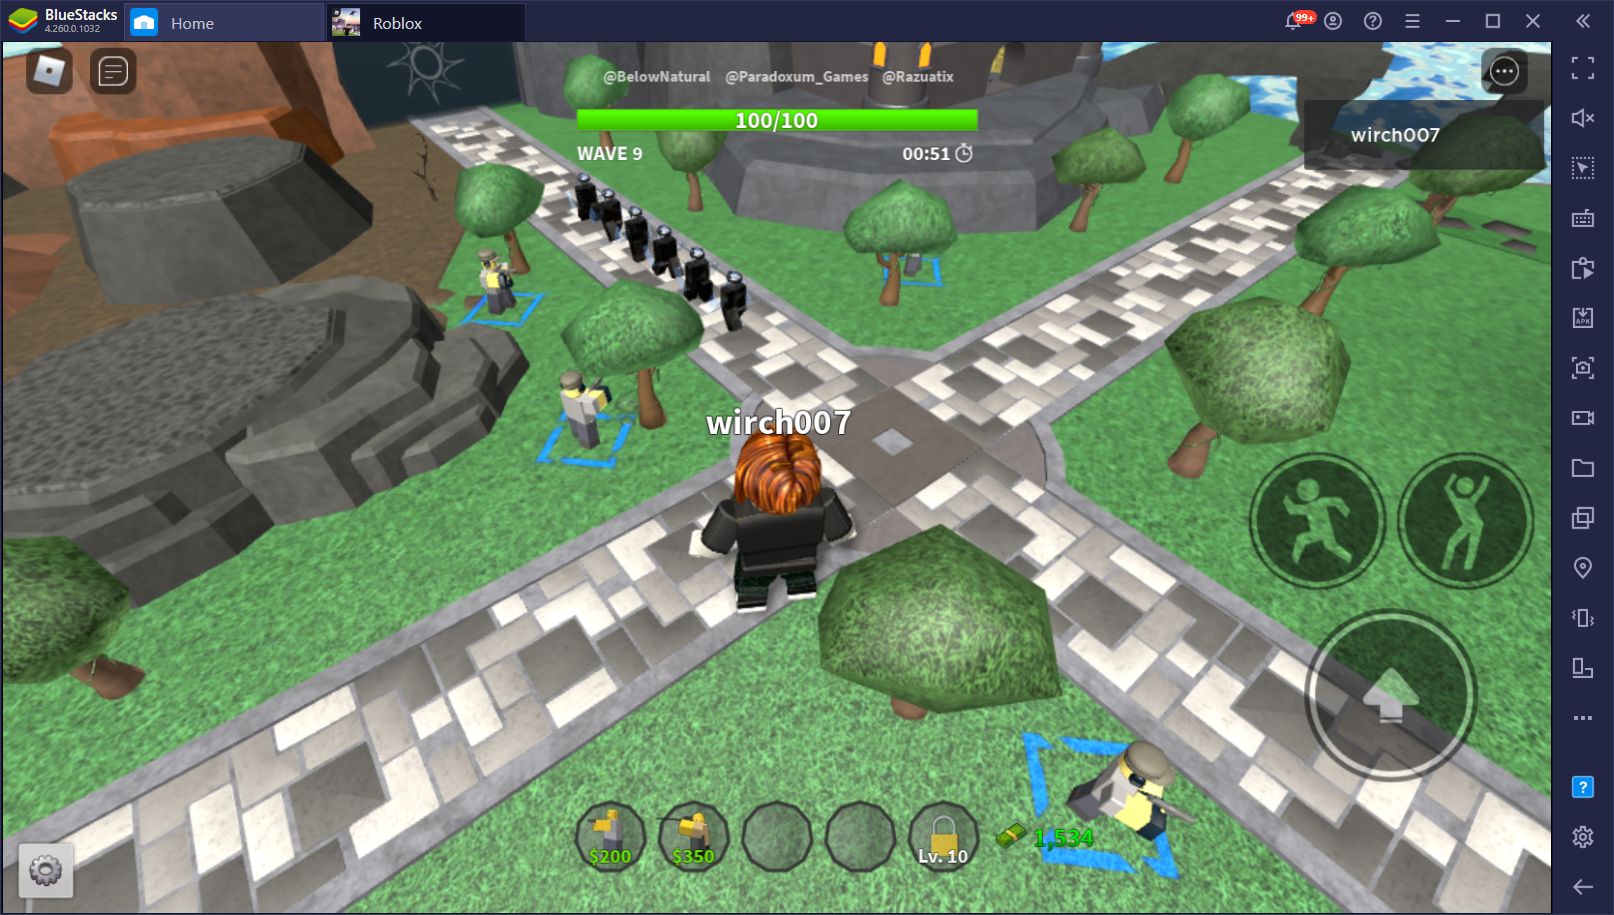 The Best Roblox Games To Play In 2021 Bluestacks - swat simulator roblox